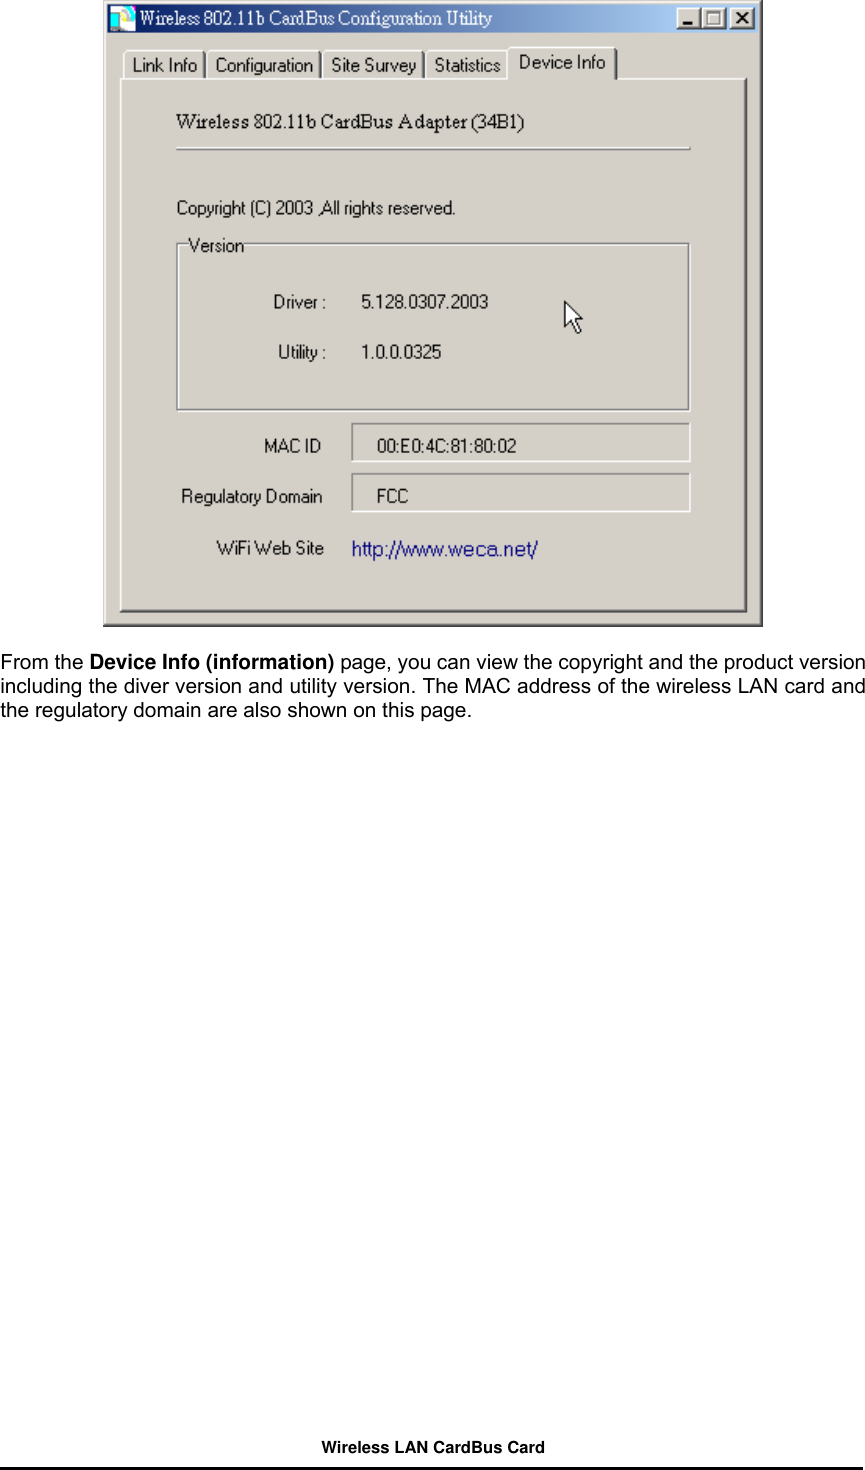   From the Device Info (information) page, you can view the copyright and the product version including the diver version and utility version. The MAC address of the wireless LAN card and the regulatory domain are also shown on this page.          Wireless LAN CardBus Card 